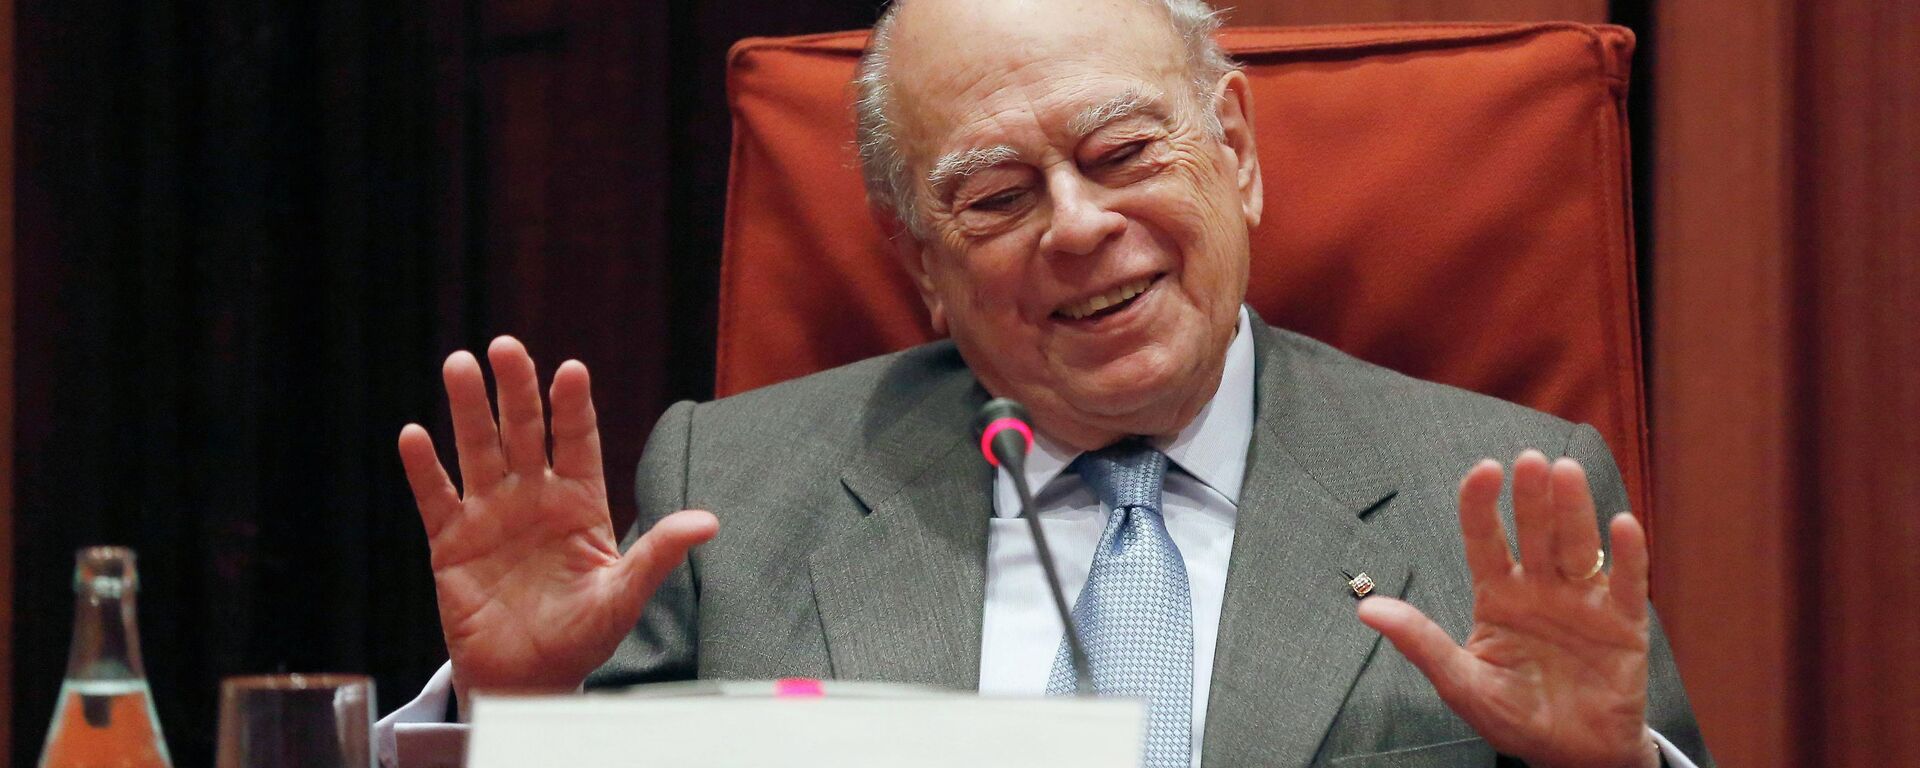 Catalonia's former president Jordi Pujol appears before a commission investigating tax evasion and money laundering at the Catalan Parliament, in Barcelona February 23, 2015 - Sputnik Mundo, 1920, 16.06.2021